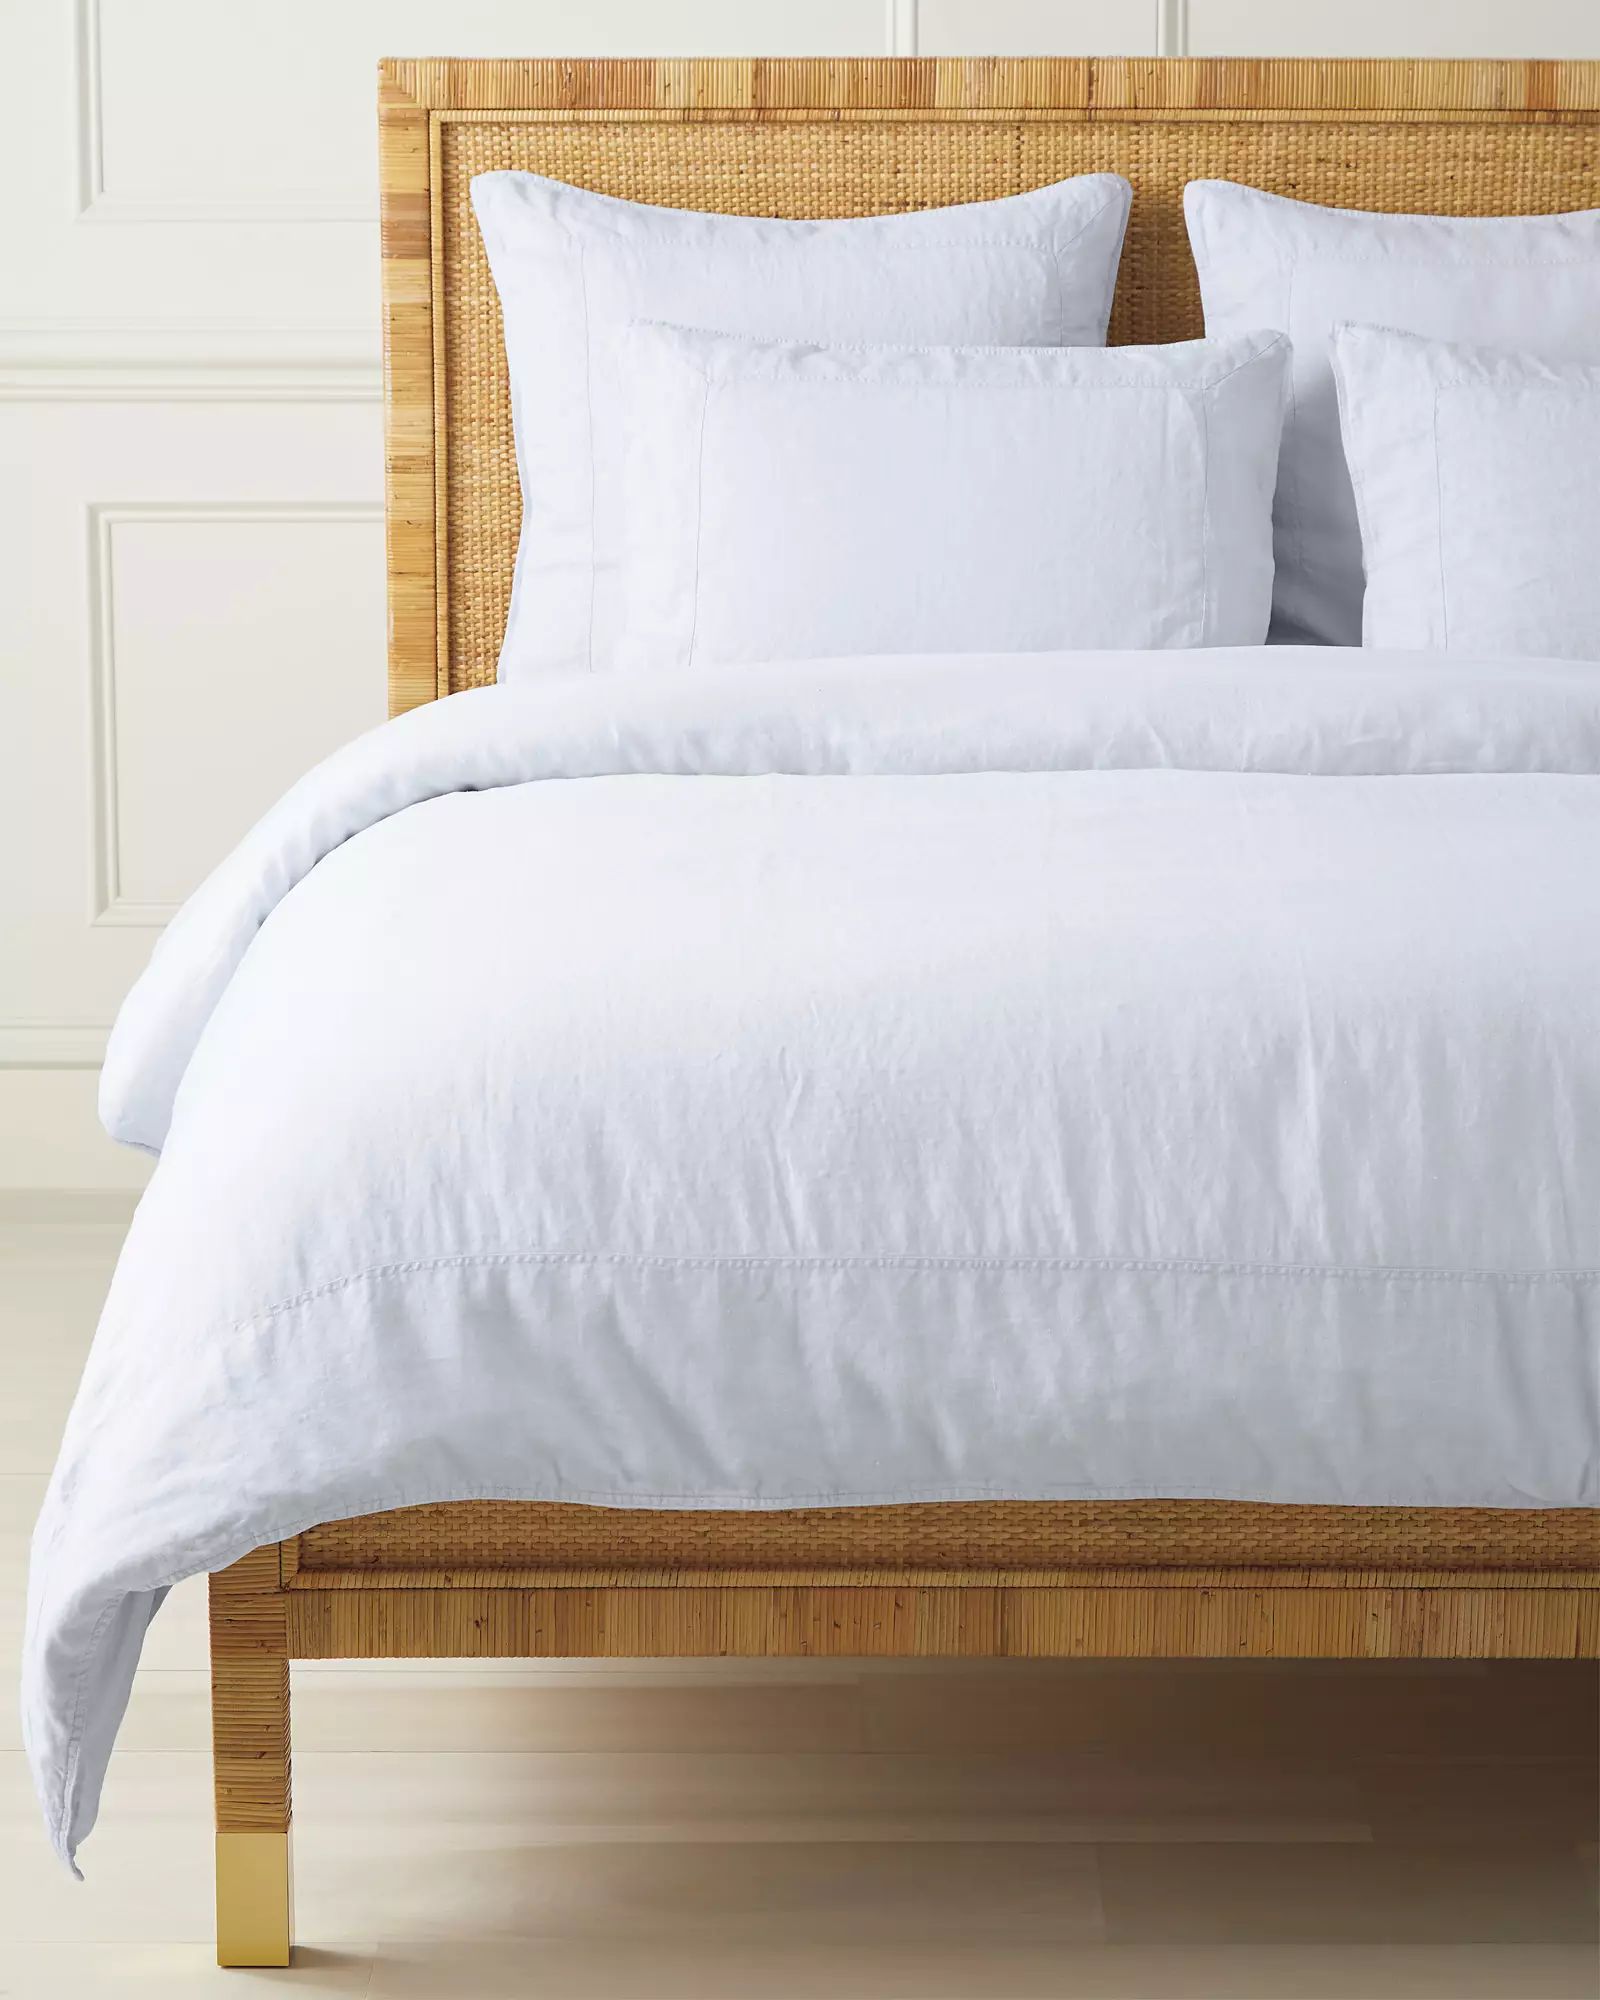 Positano Linen Duvet Cover | Serena and Lily